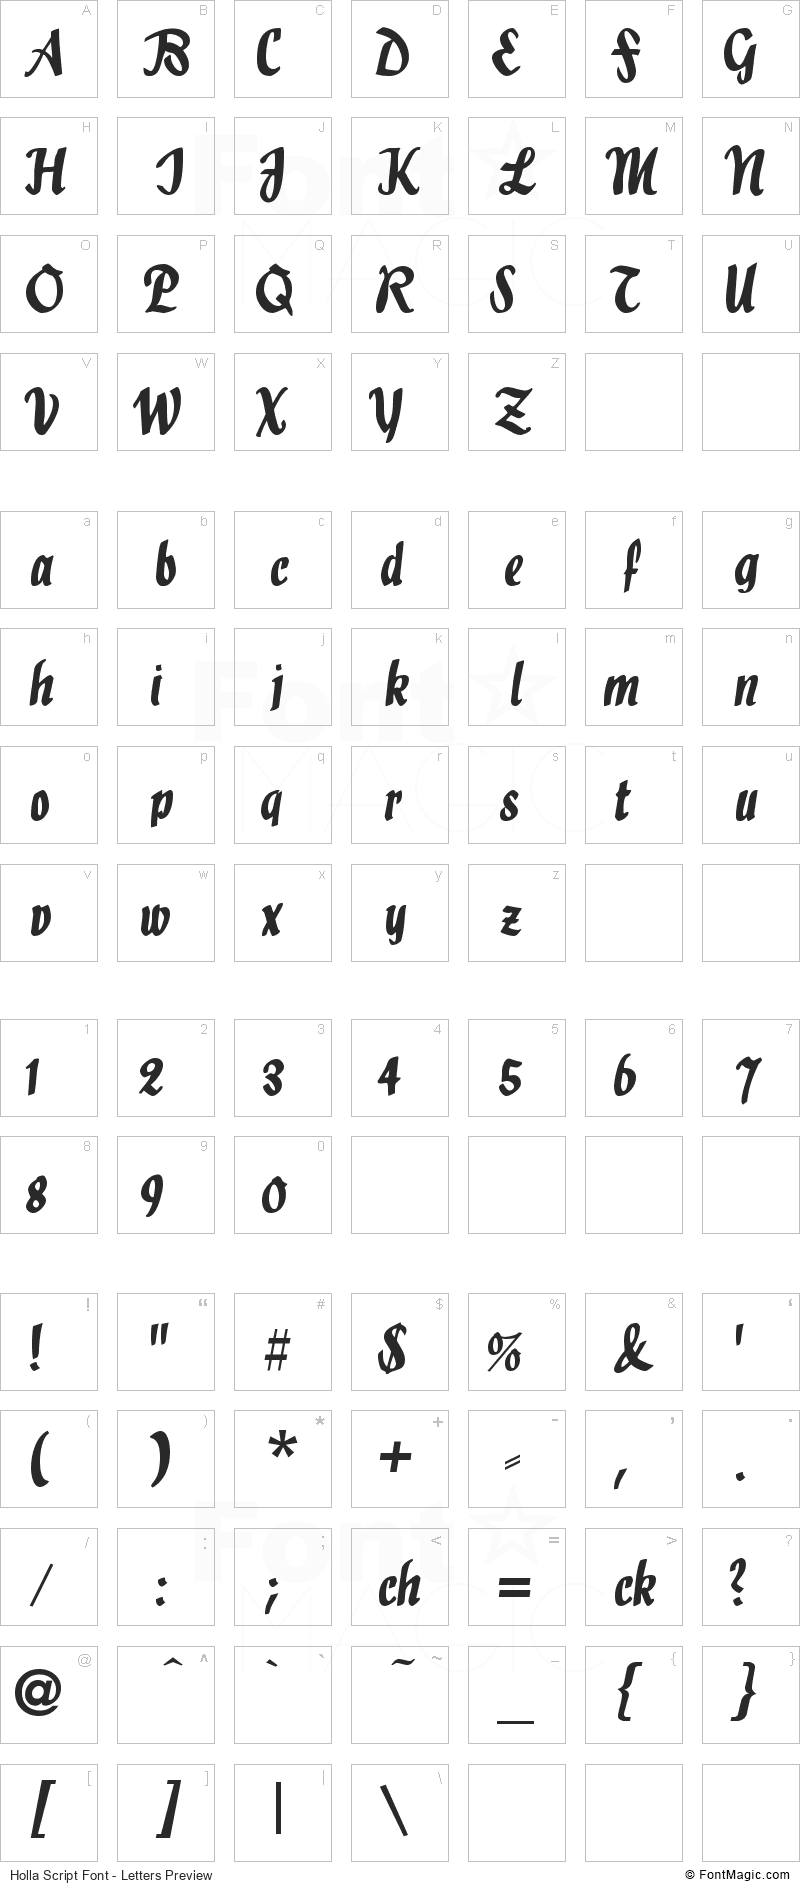 Holla Script Font - All Latters Preview Chart